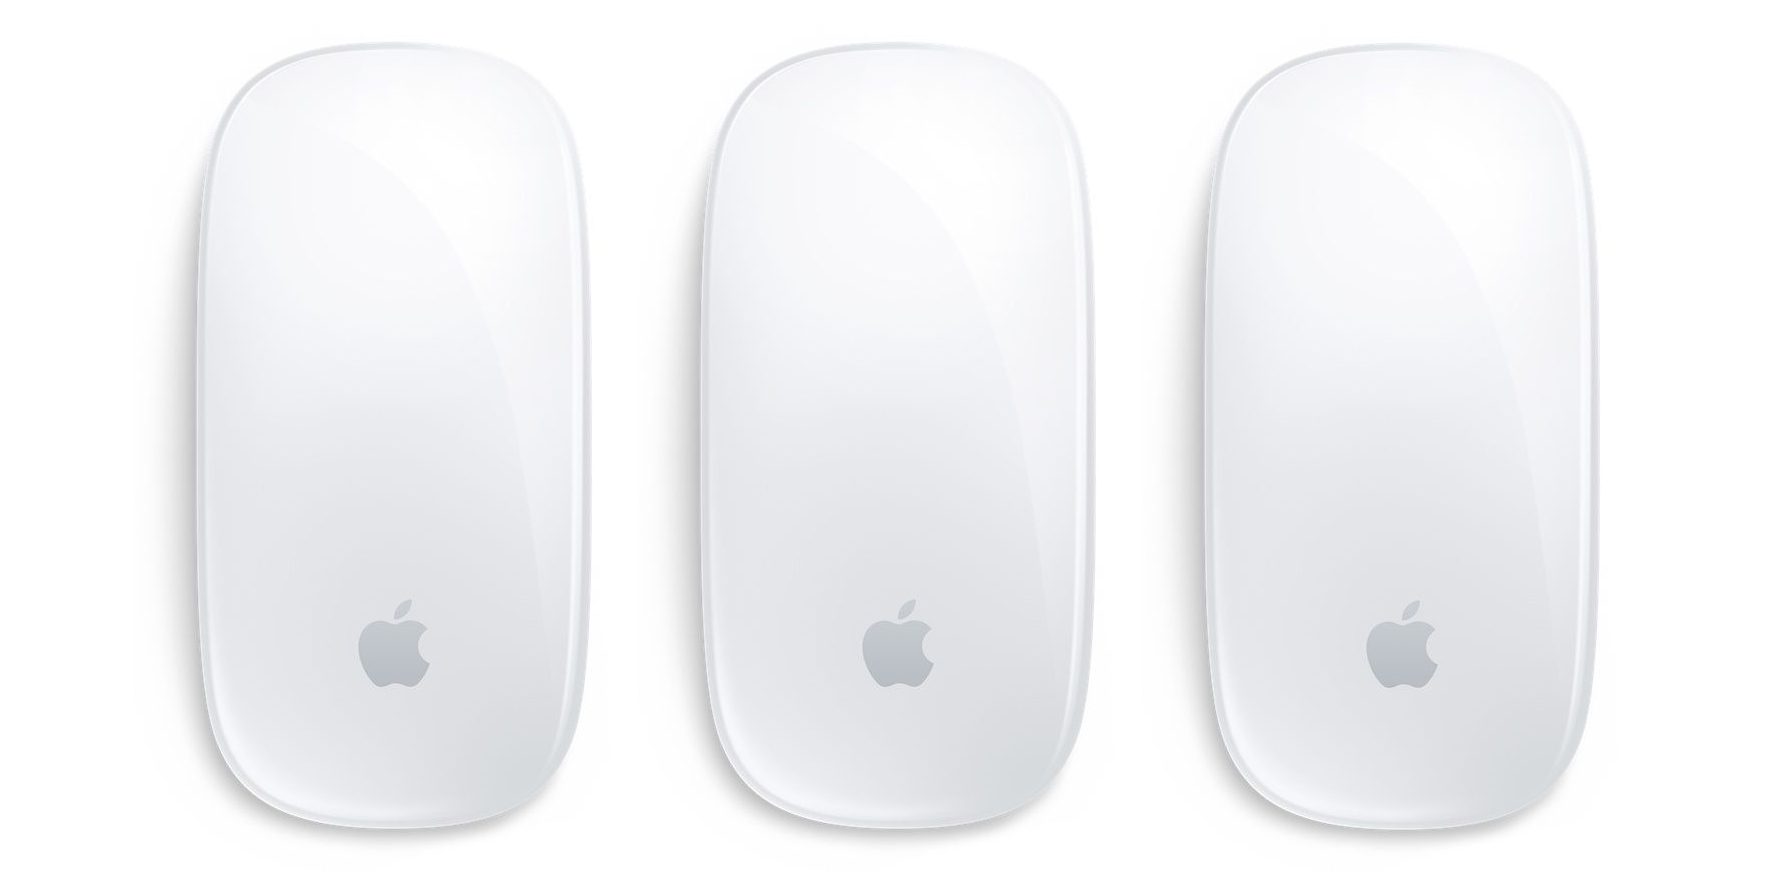 Apple's Magic Mouse 2 gets a $20 discount to $59 shipped